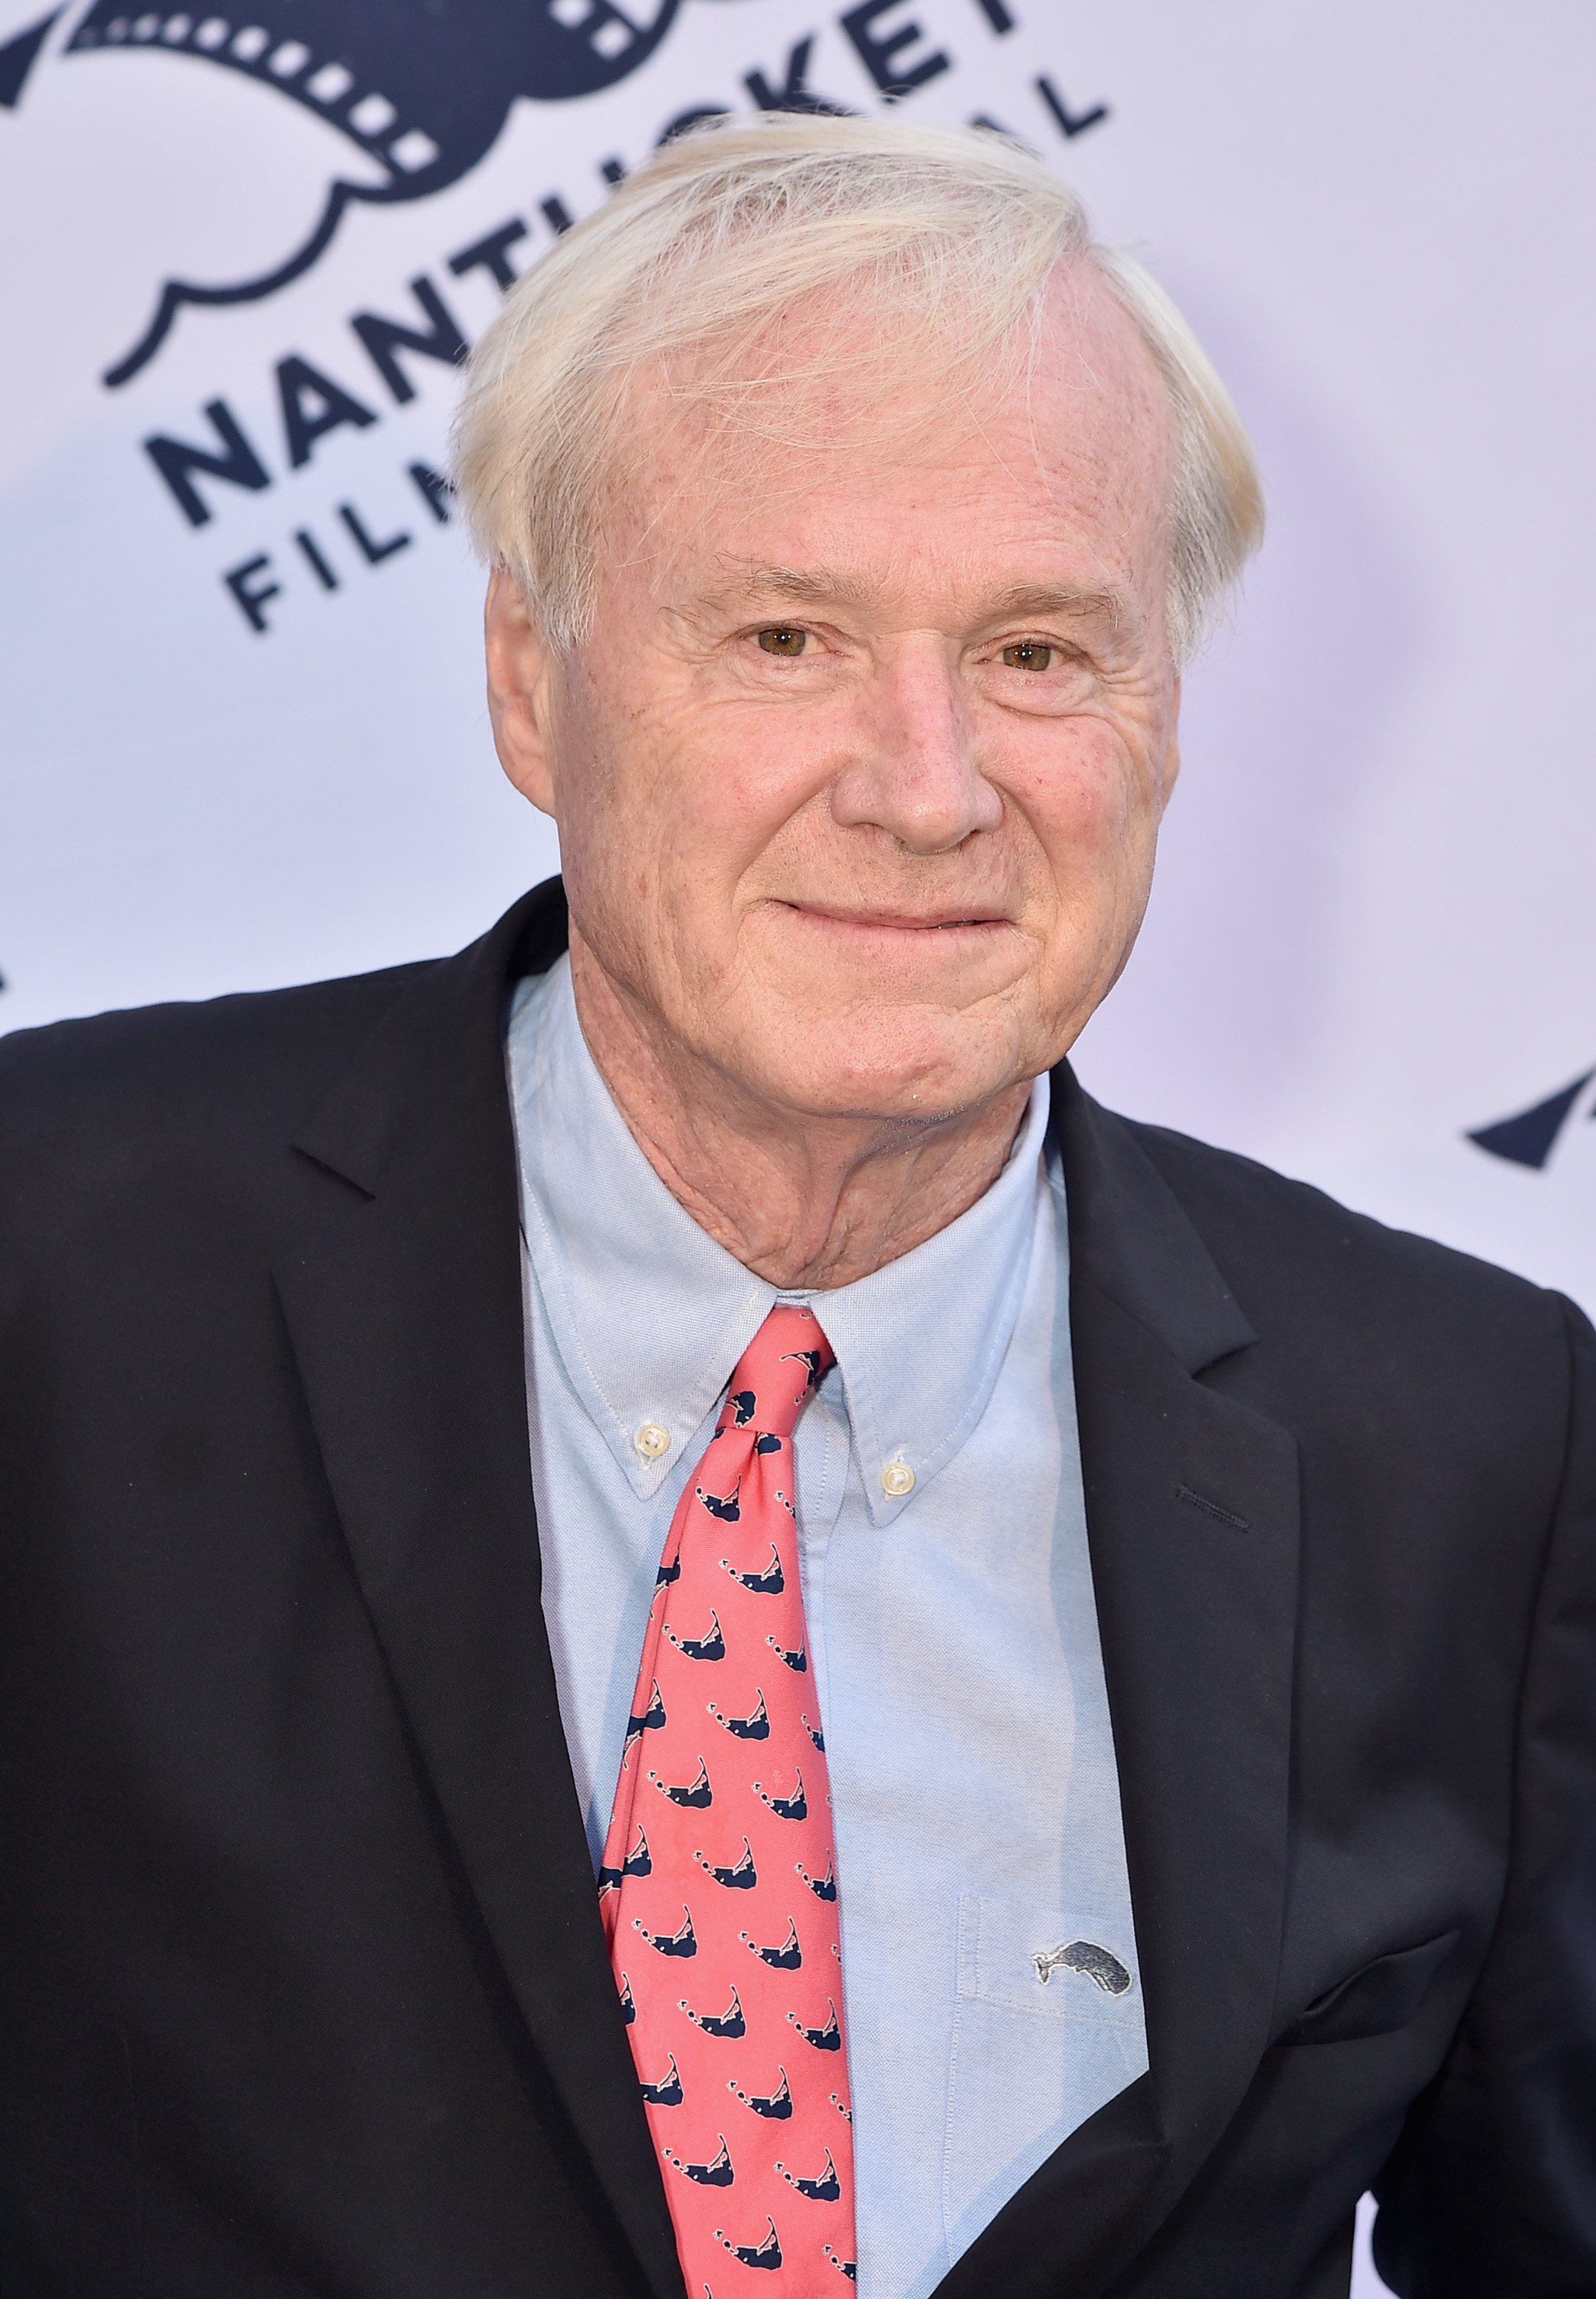 Talk show host Chris Matthews attends the Screenwriters Tribute during the 2017 Nantucket Film Festival - Day 3 on June 23, 2017 in Nantucket, Massachusetts. (Theo Wargo—Getty Images for Nantucket Film Festival)